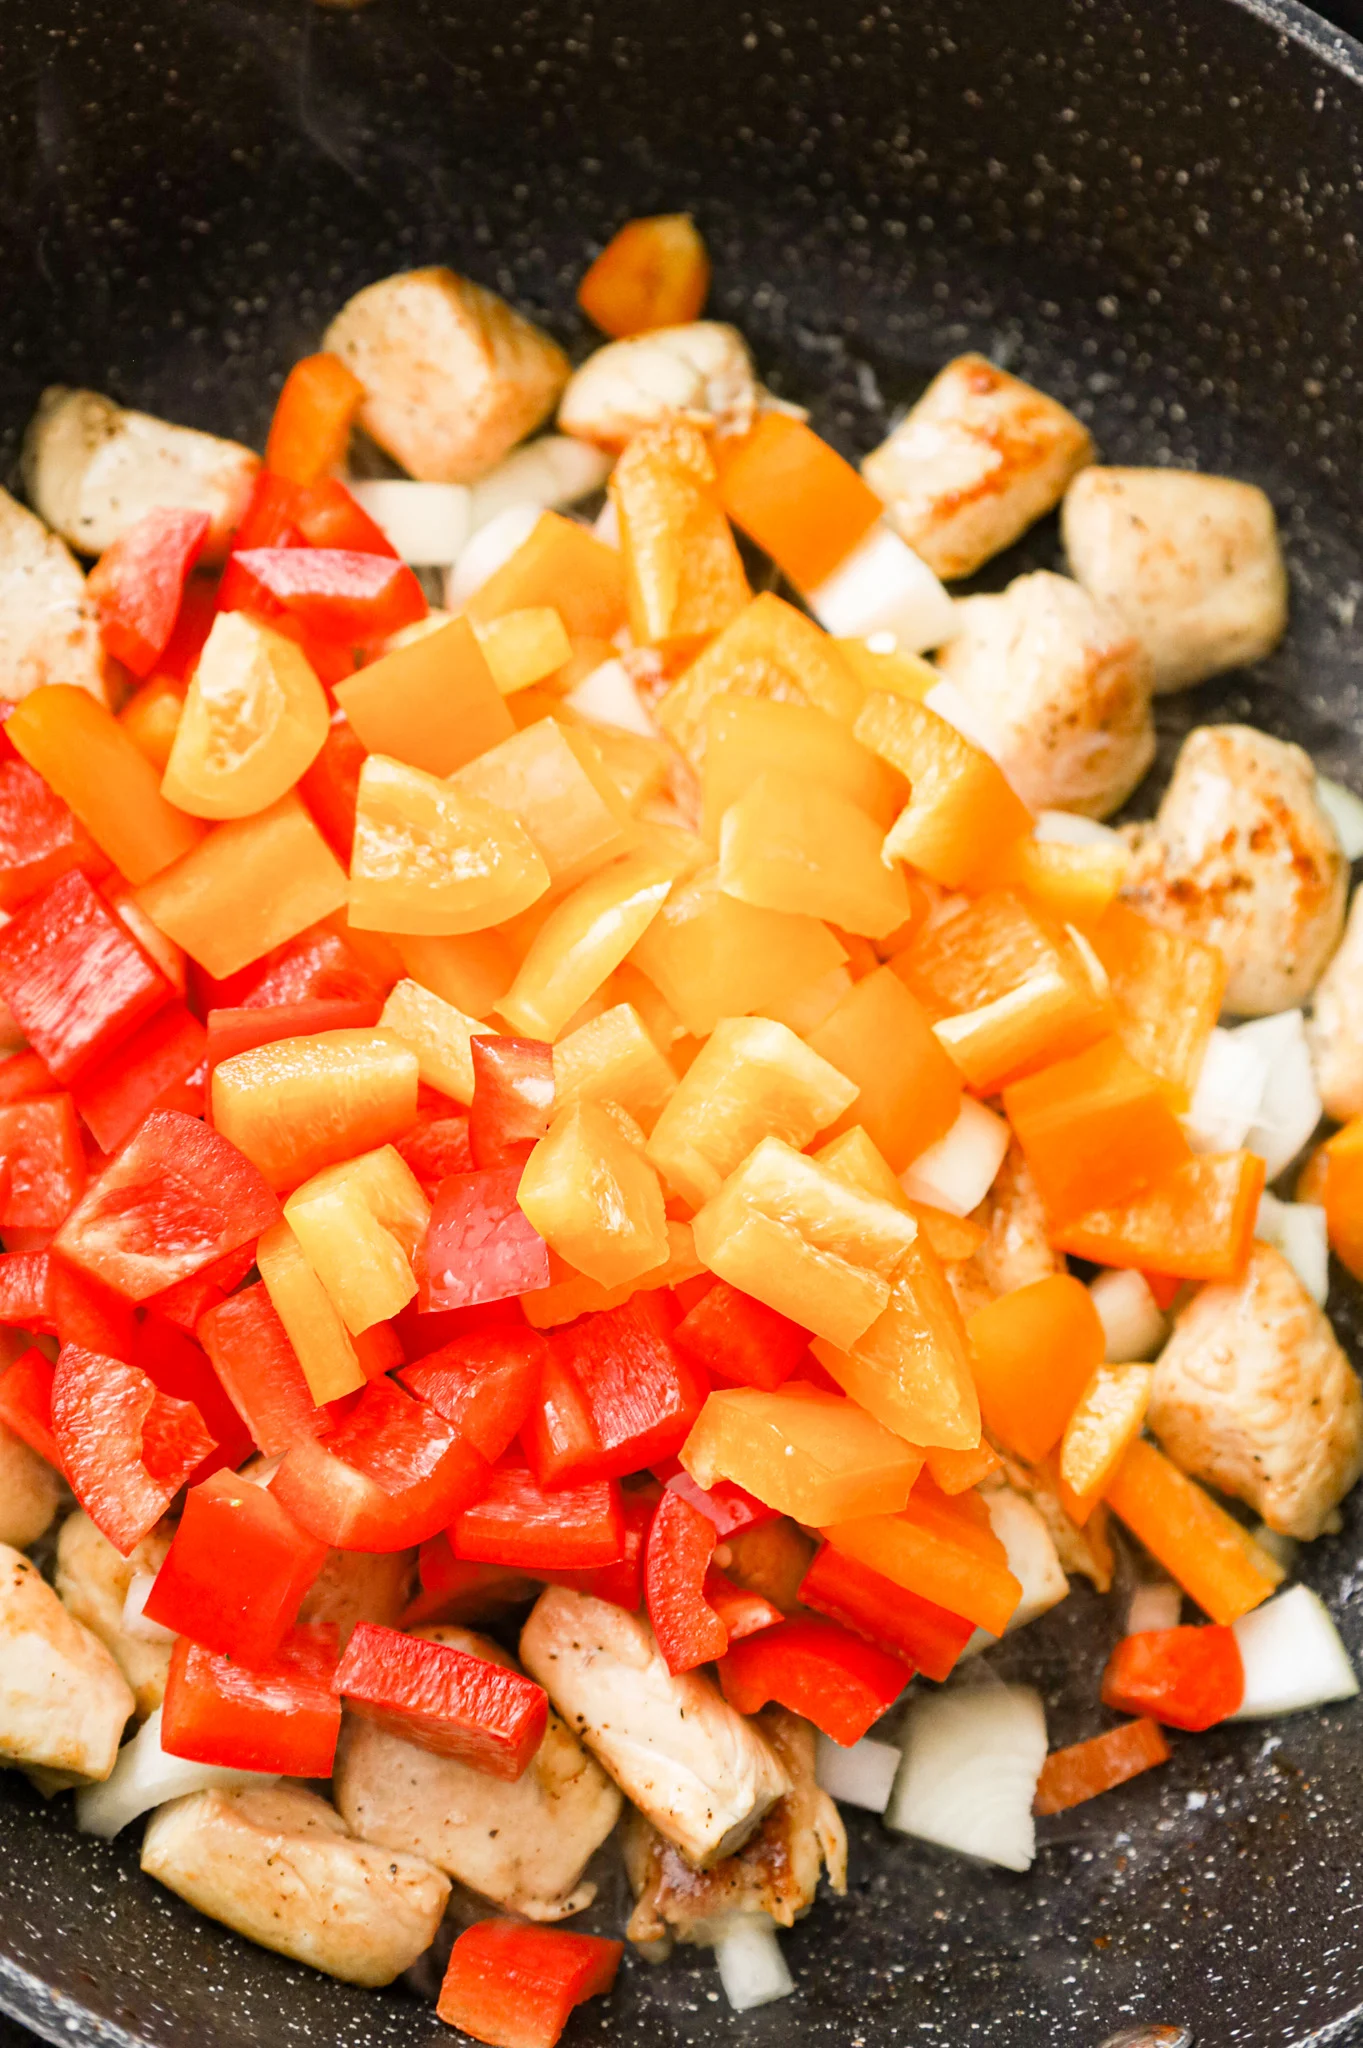 diced onions and diced bell peppers added to a skillet with cooked chicken breast chunks